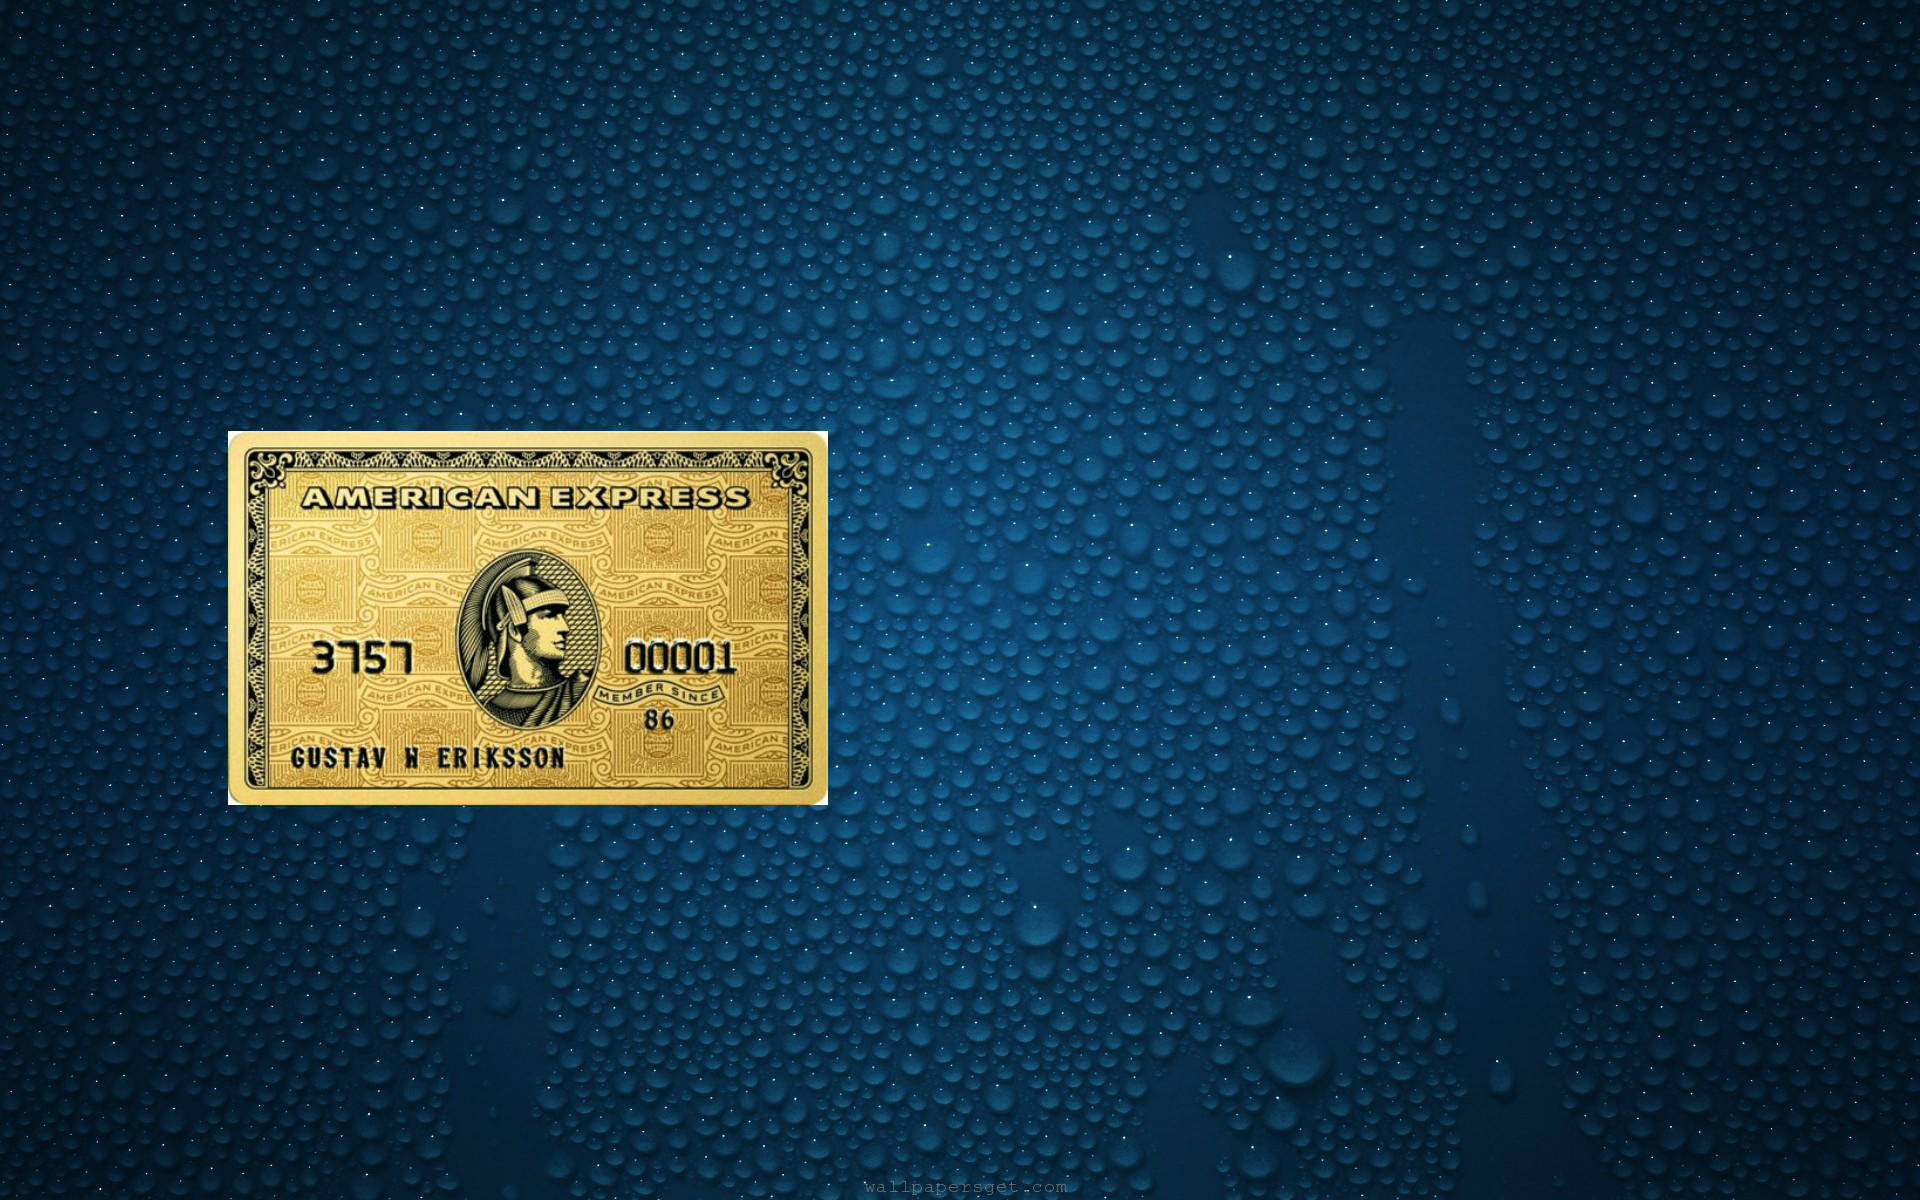 American Express Old Gold Card